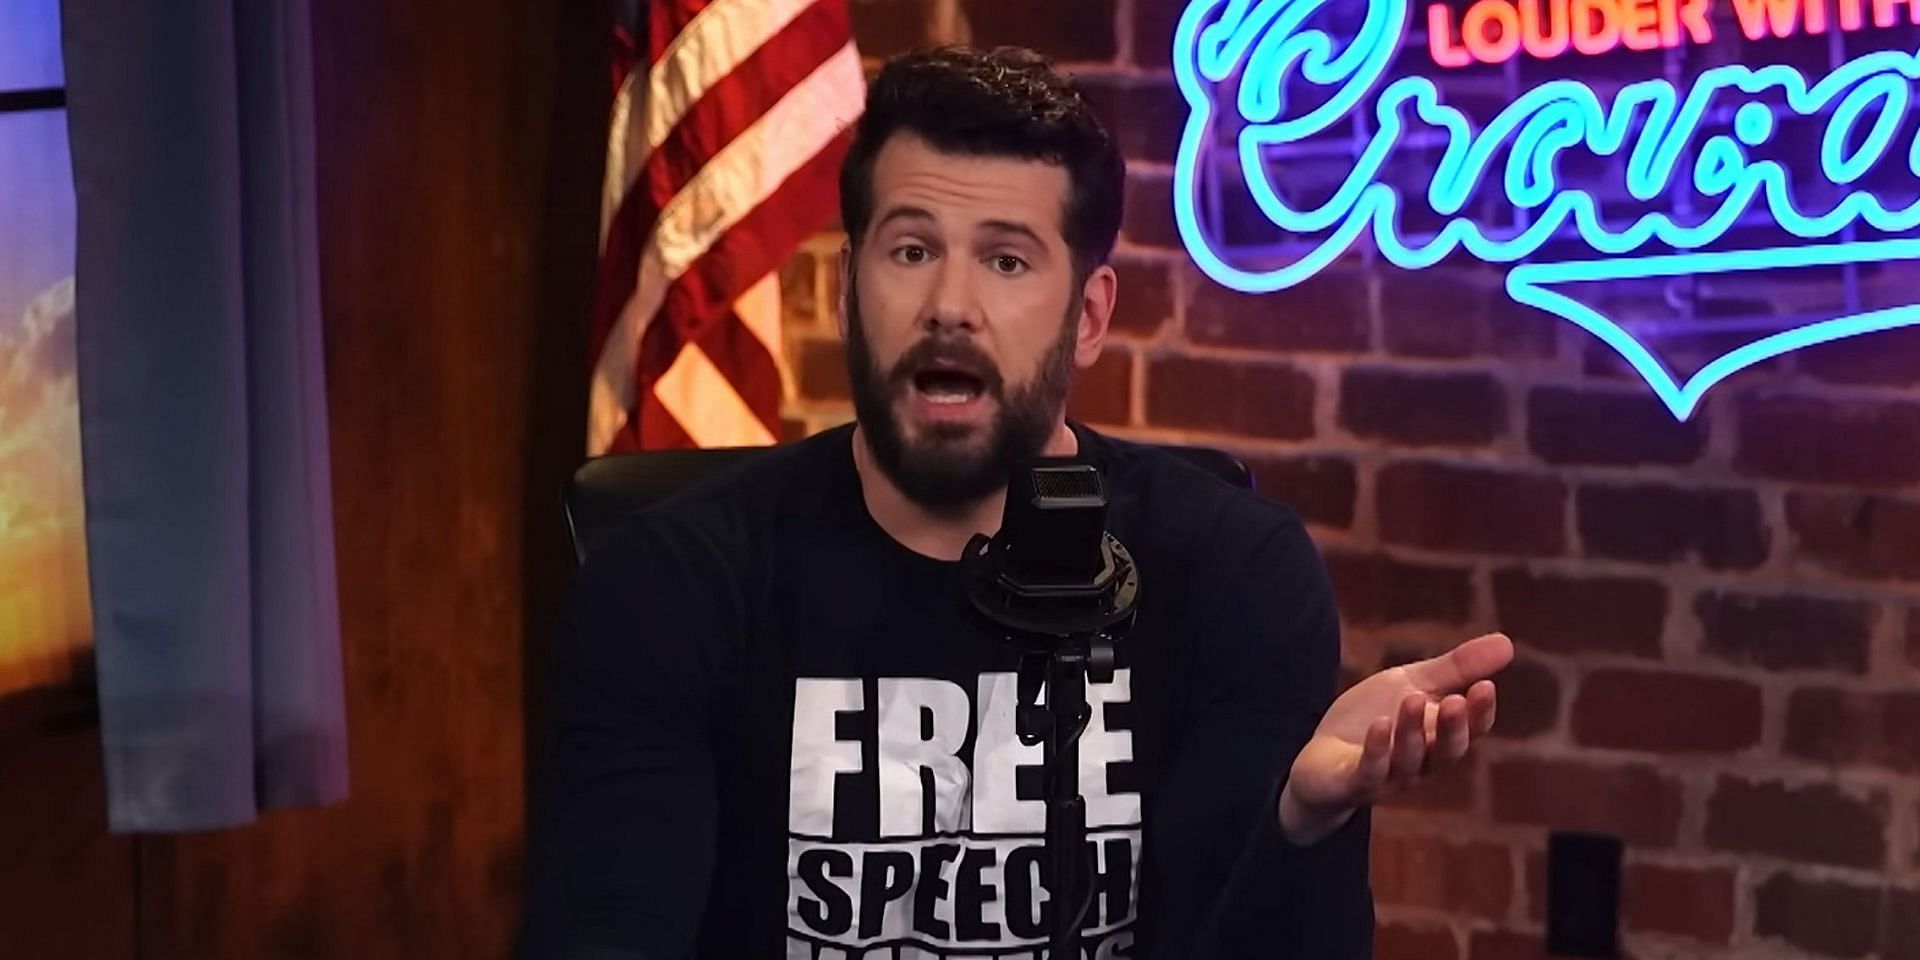 Video of Steven Crowder berating pregnant wife leaves netizens outraged (Image via Steven Crowder/YouTube)